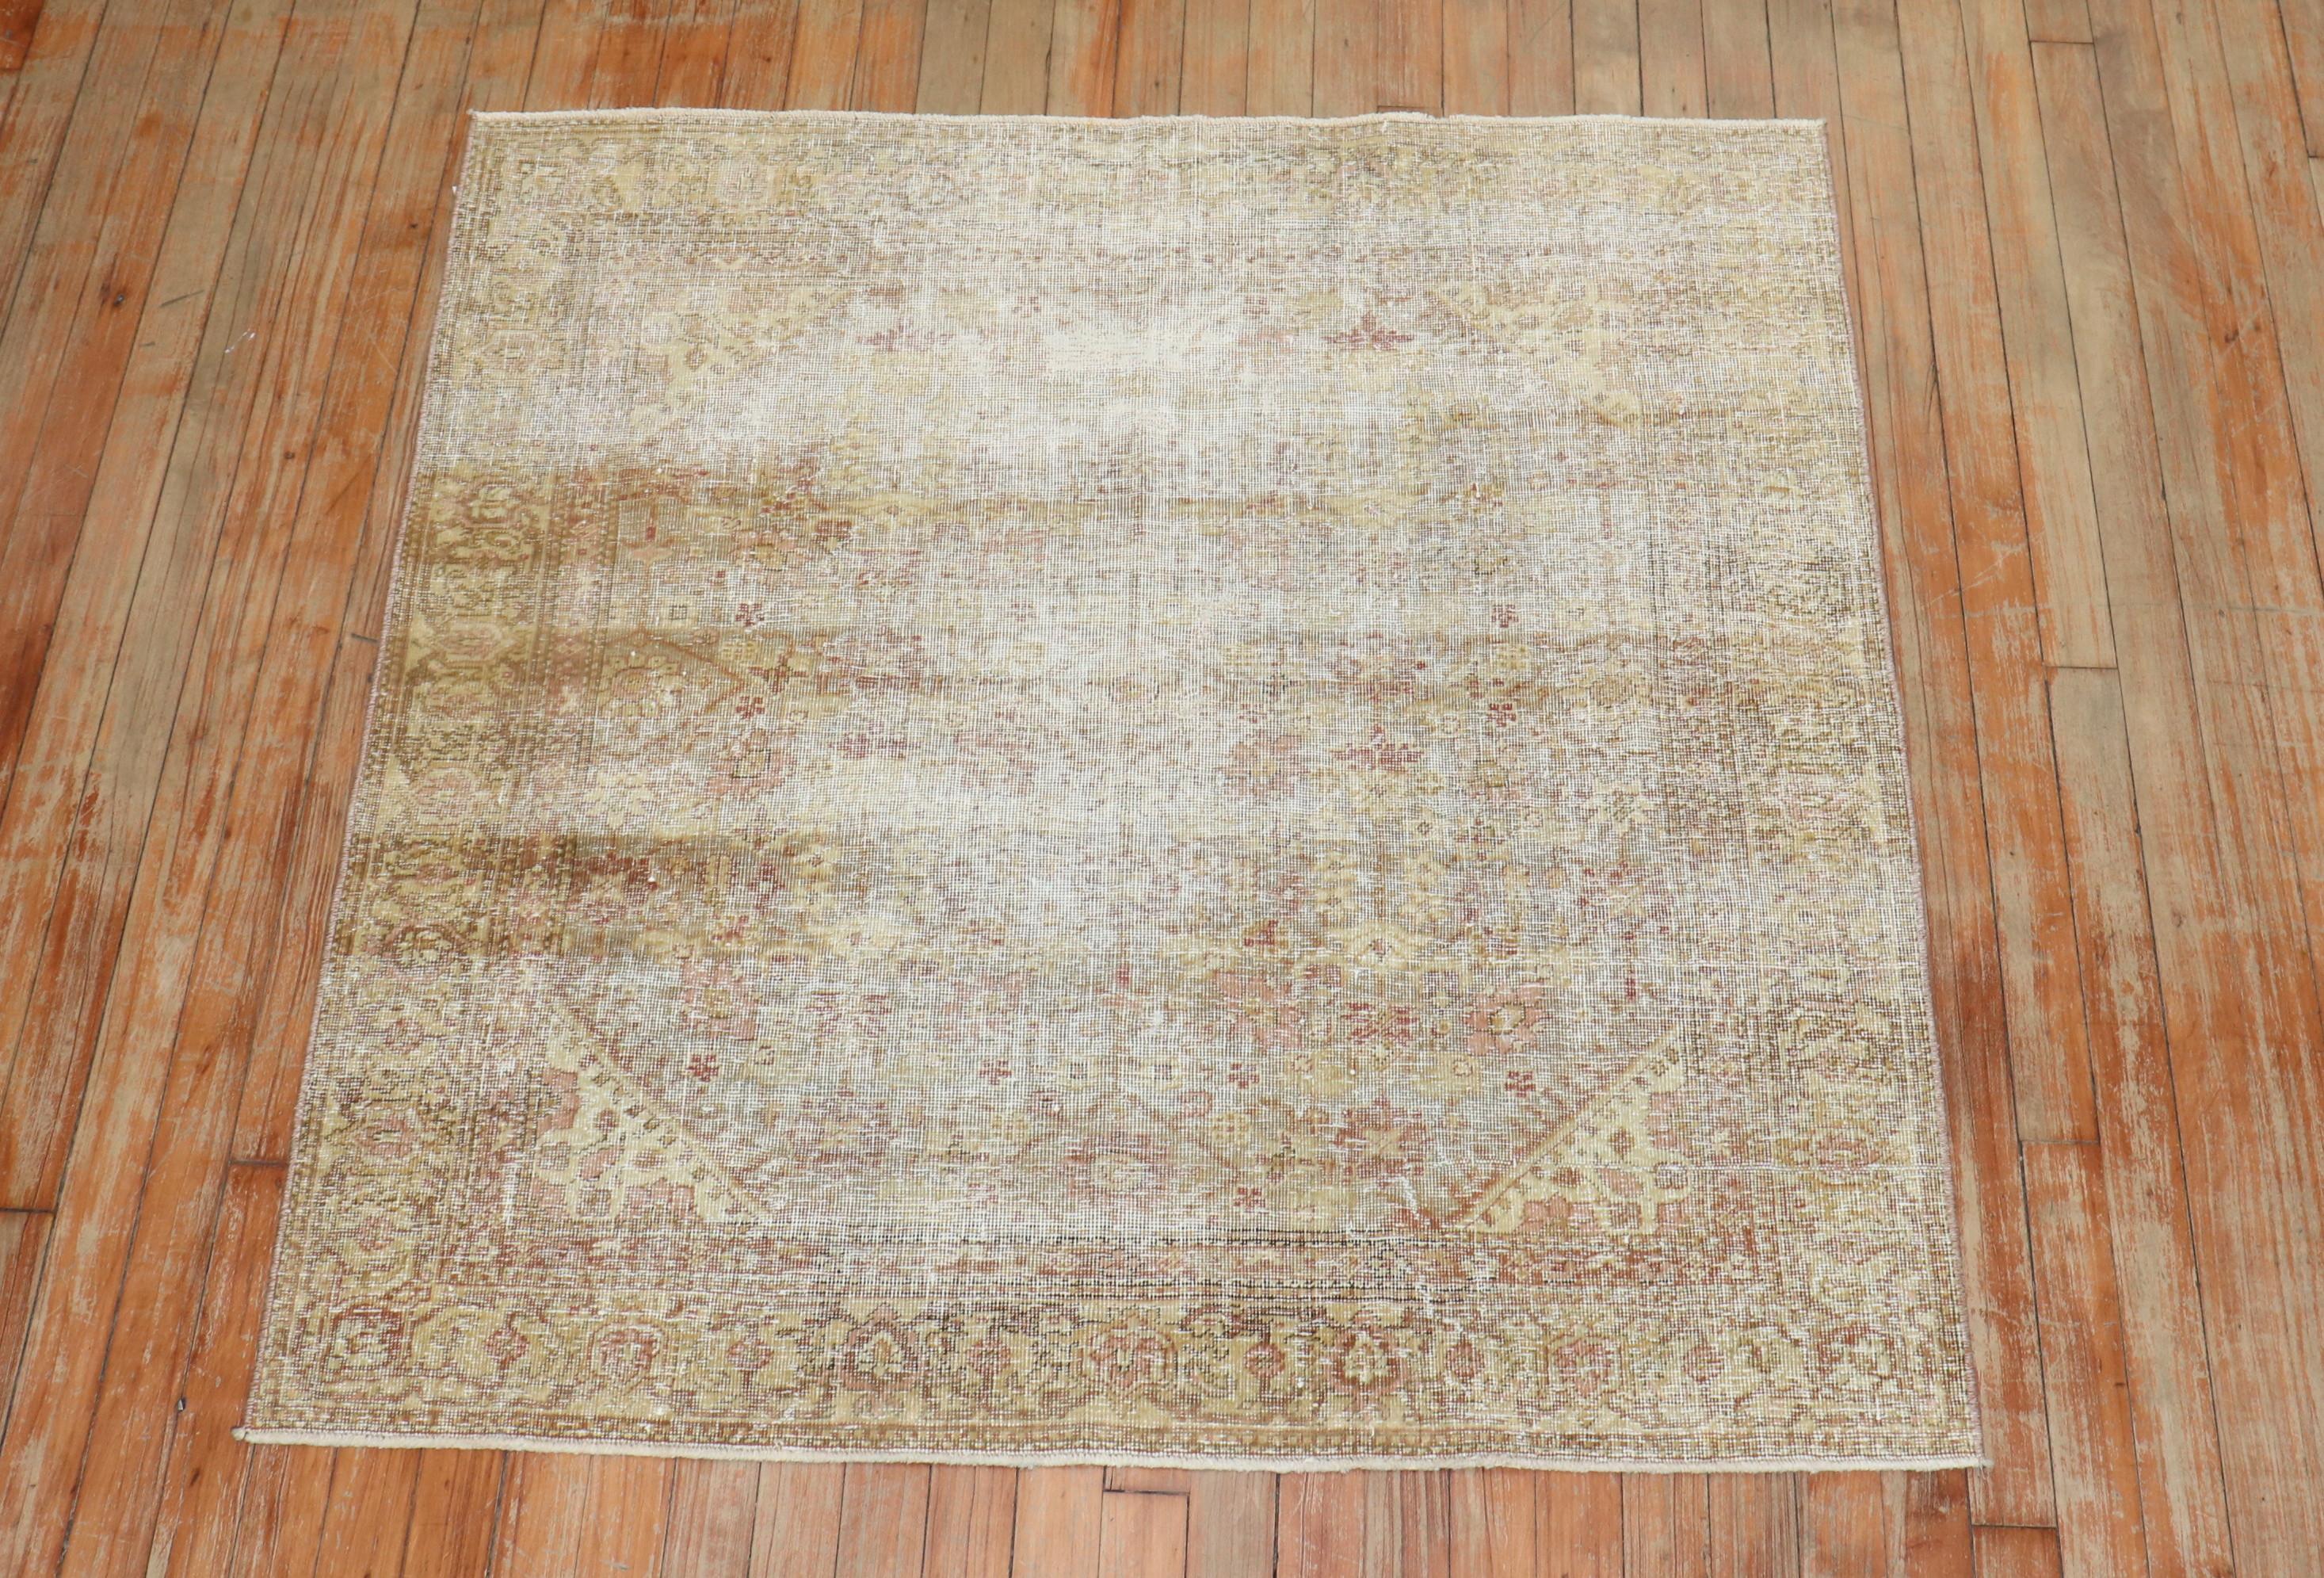 Worn Square Antique Indian Rug For Sale 1